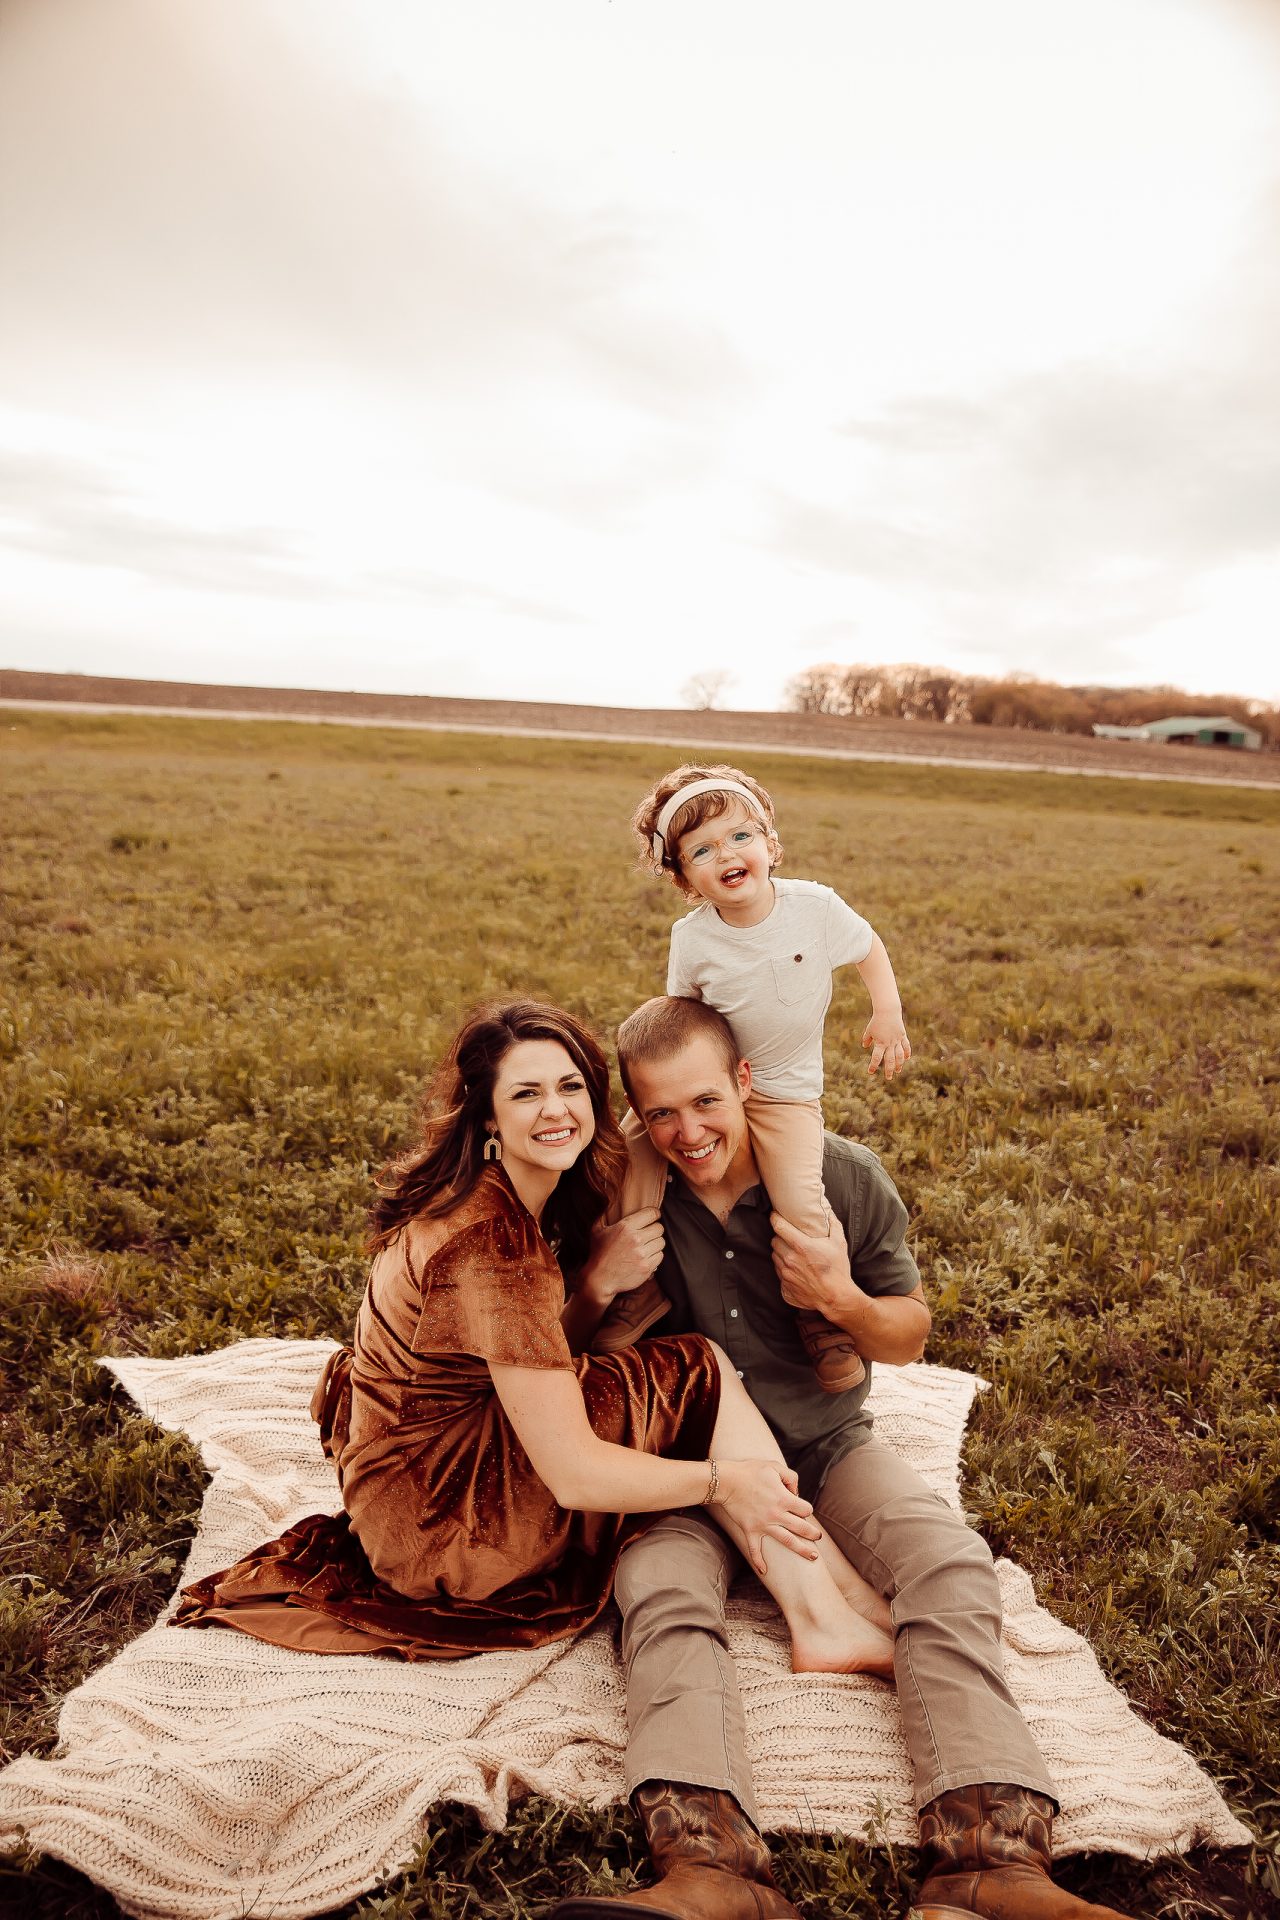 Brandon, Beth and Cooper sit in the grass smiling at the camera. Beth is an inclusion advocate with a focus on raising a deaf child.